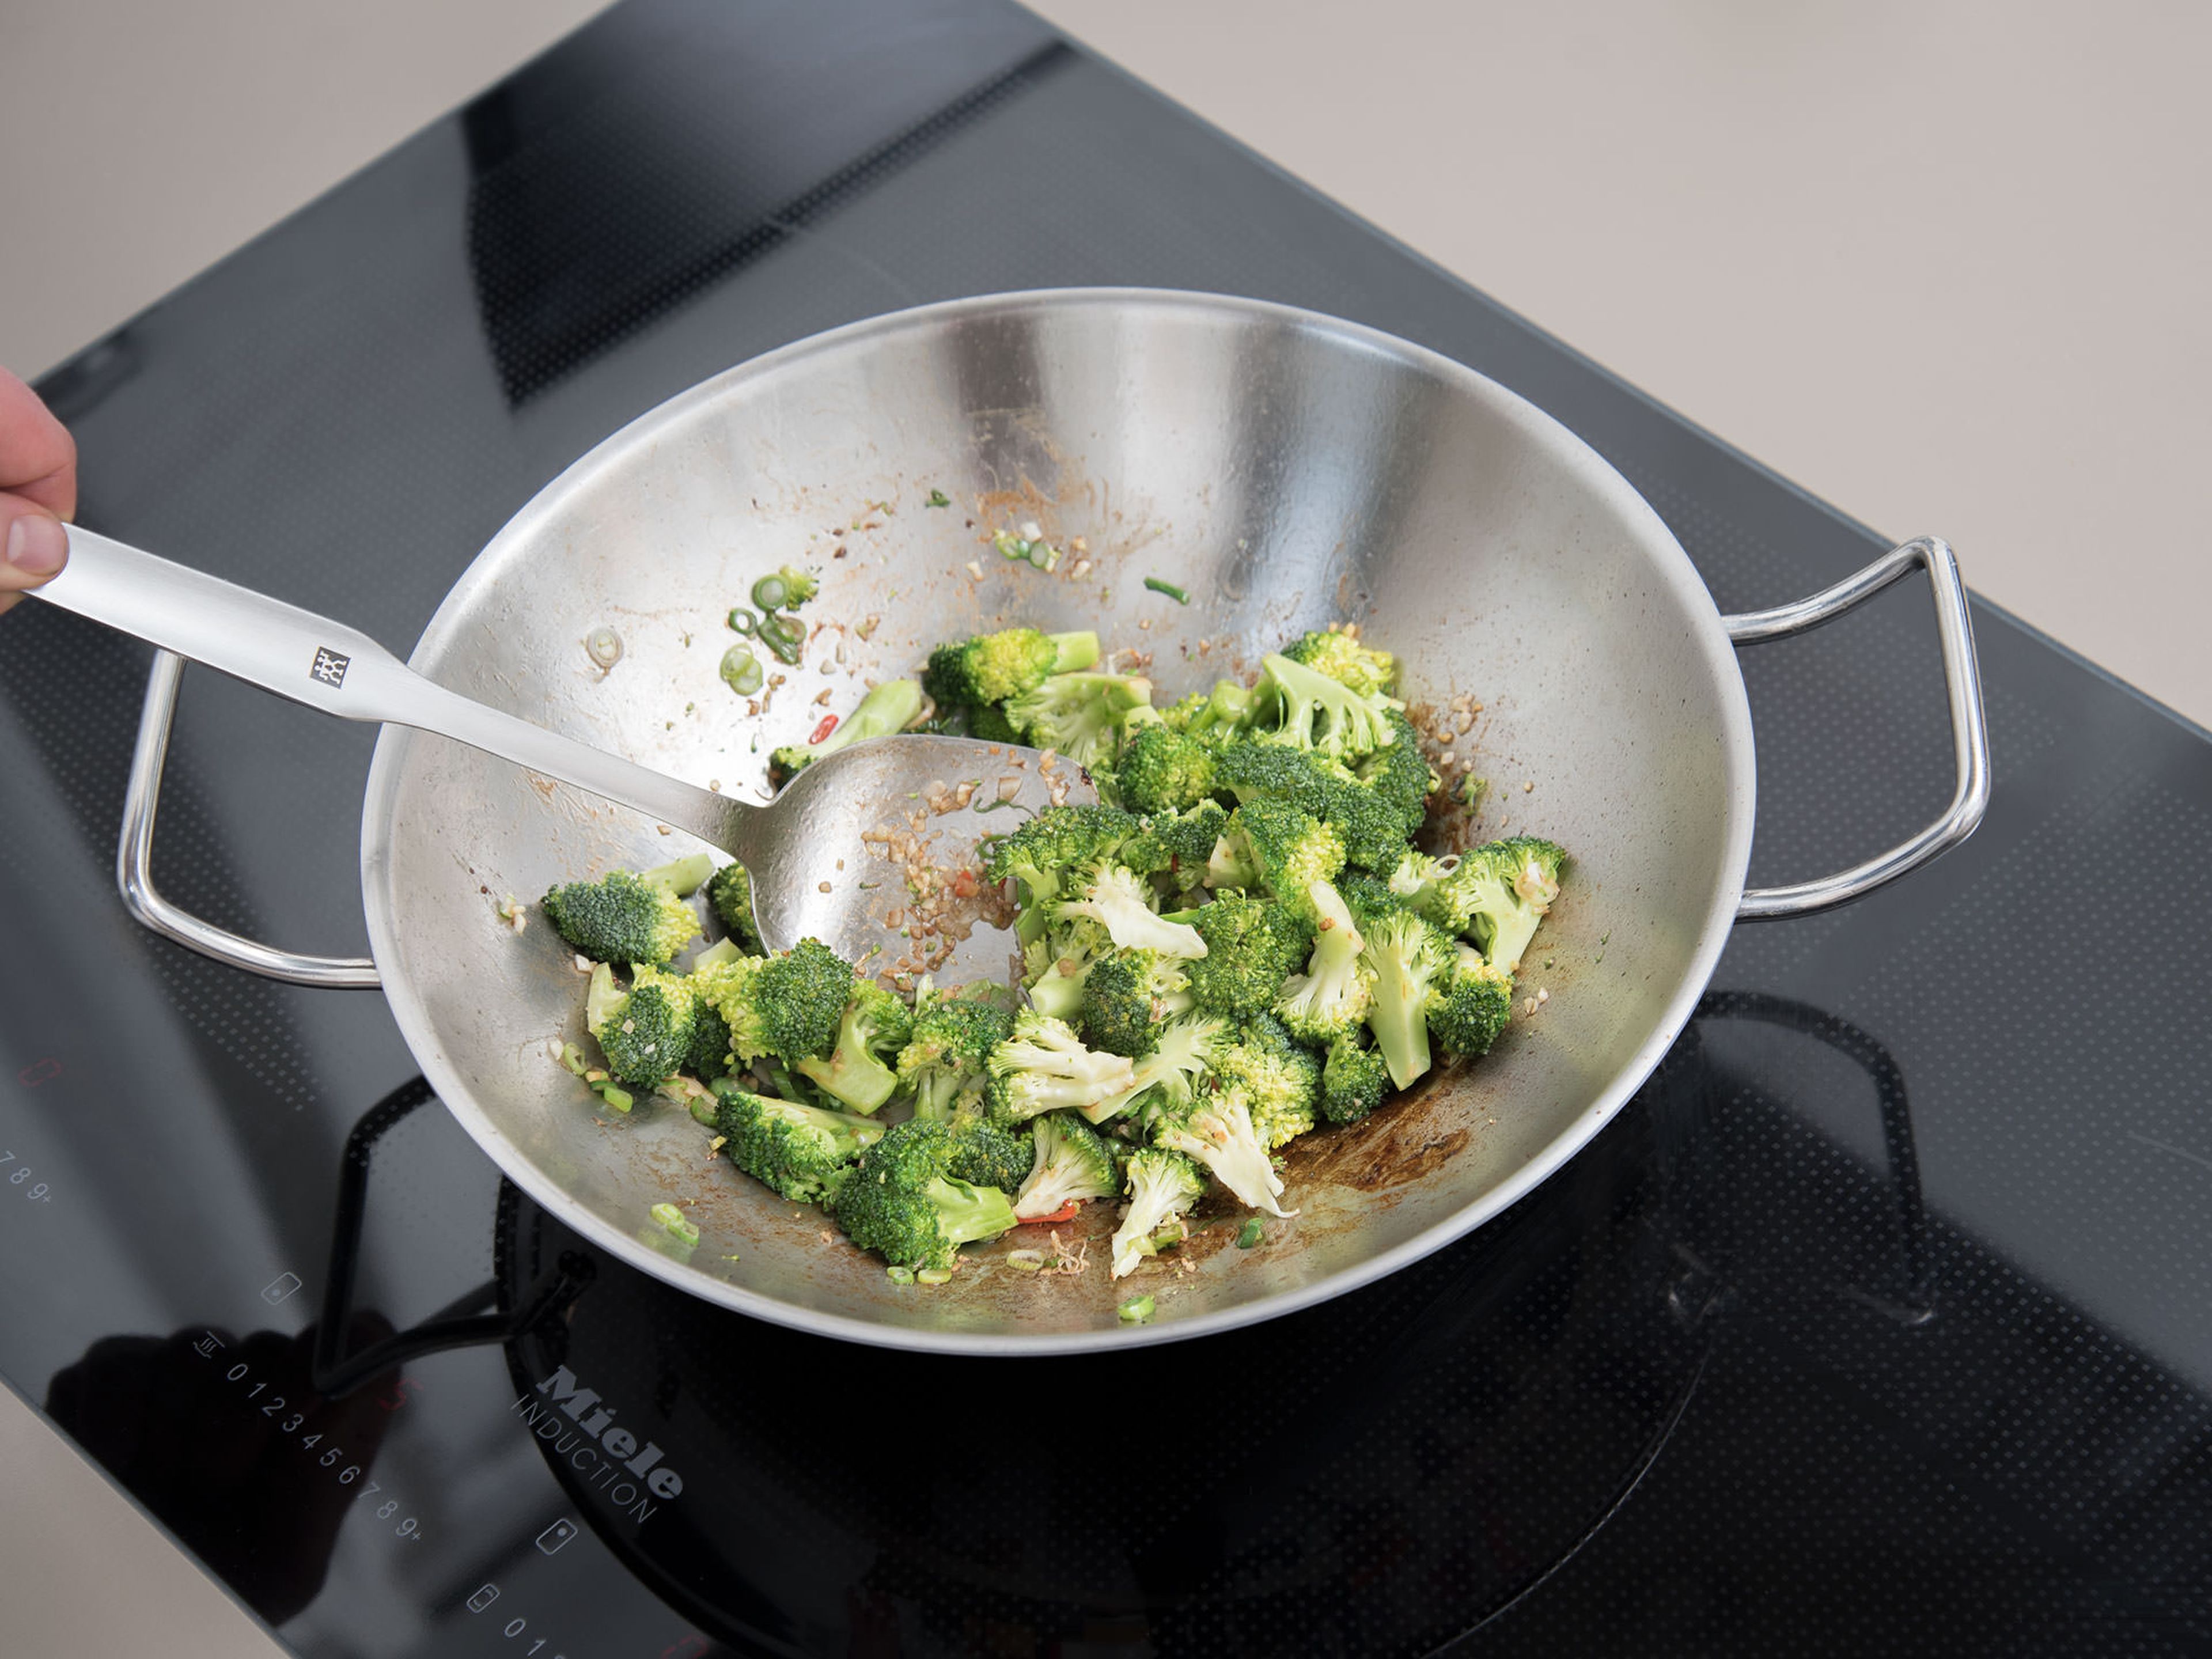 Pre-heat wok and heat some sunflower oil in it. Sauté the beef for approx. 2 - 3 min. Remove the meat from the pan and set aside, working in batches if needed. Fry the garlic, ginger, green onion, and chili with more oil. Add the broccoli florets and sauté for approx. 3 – 5 min.